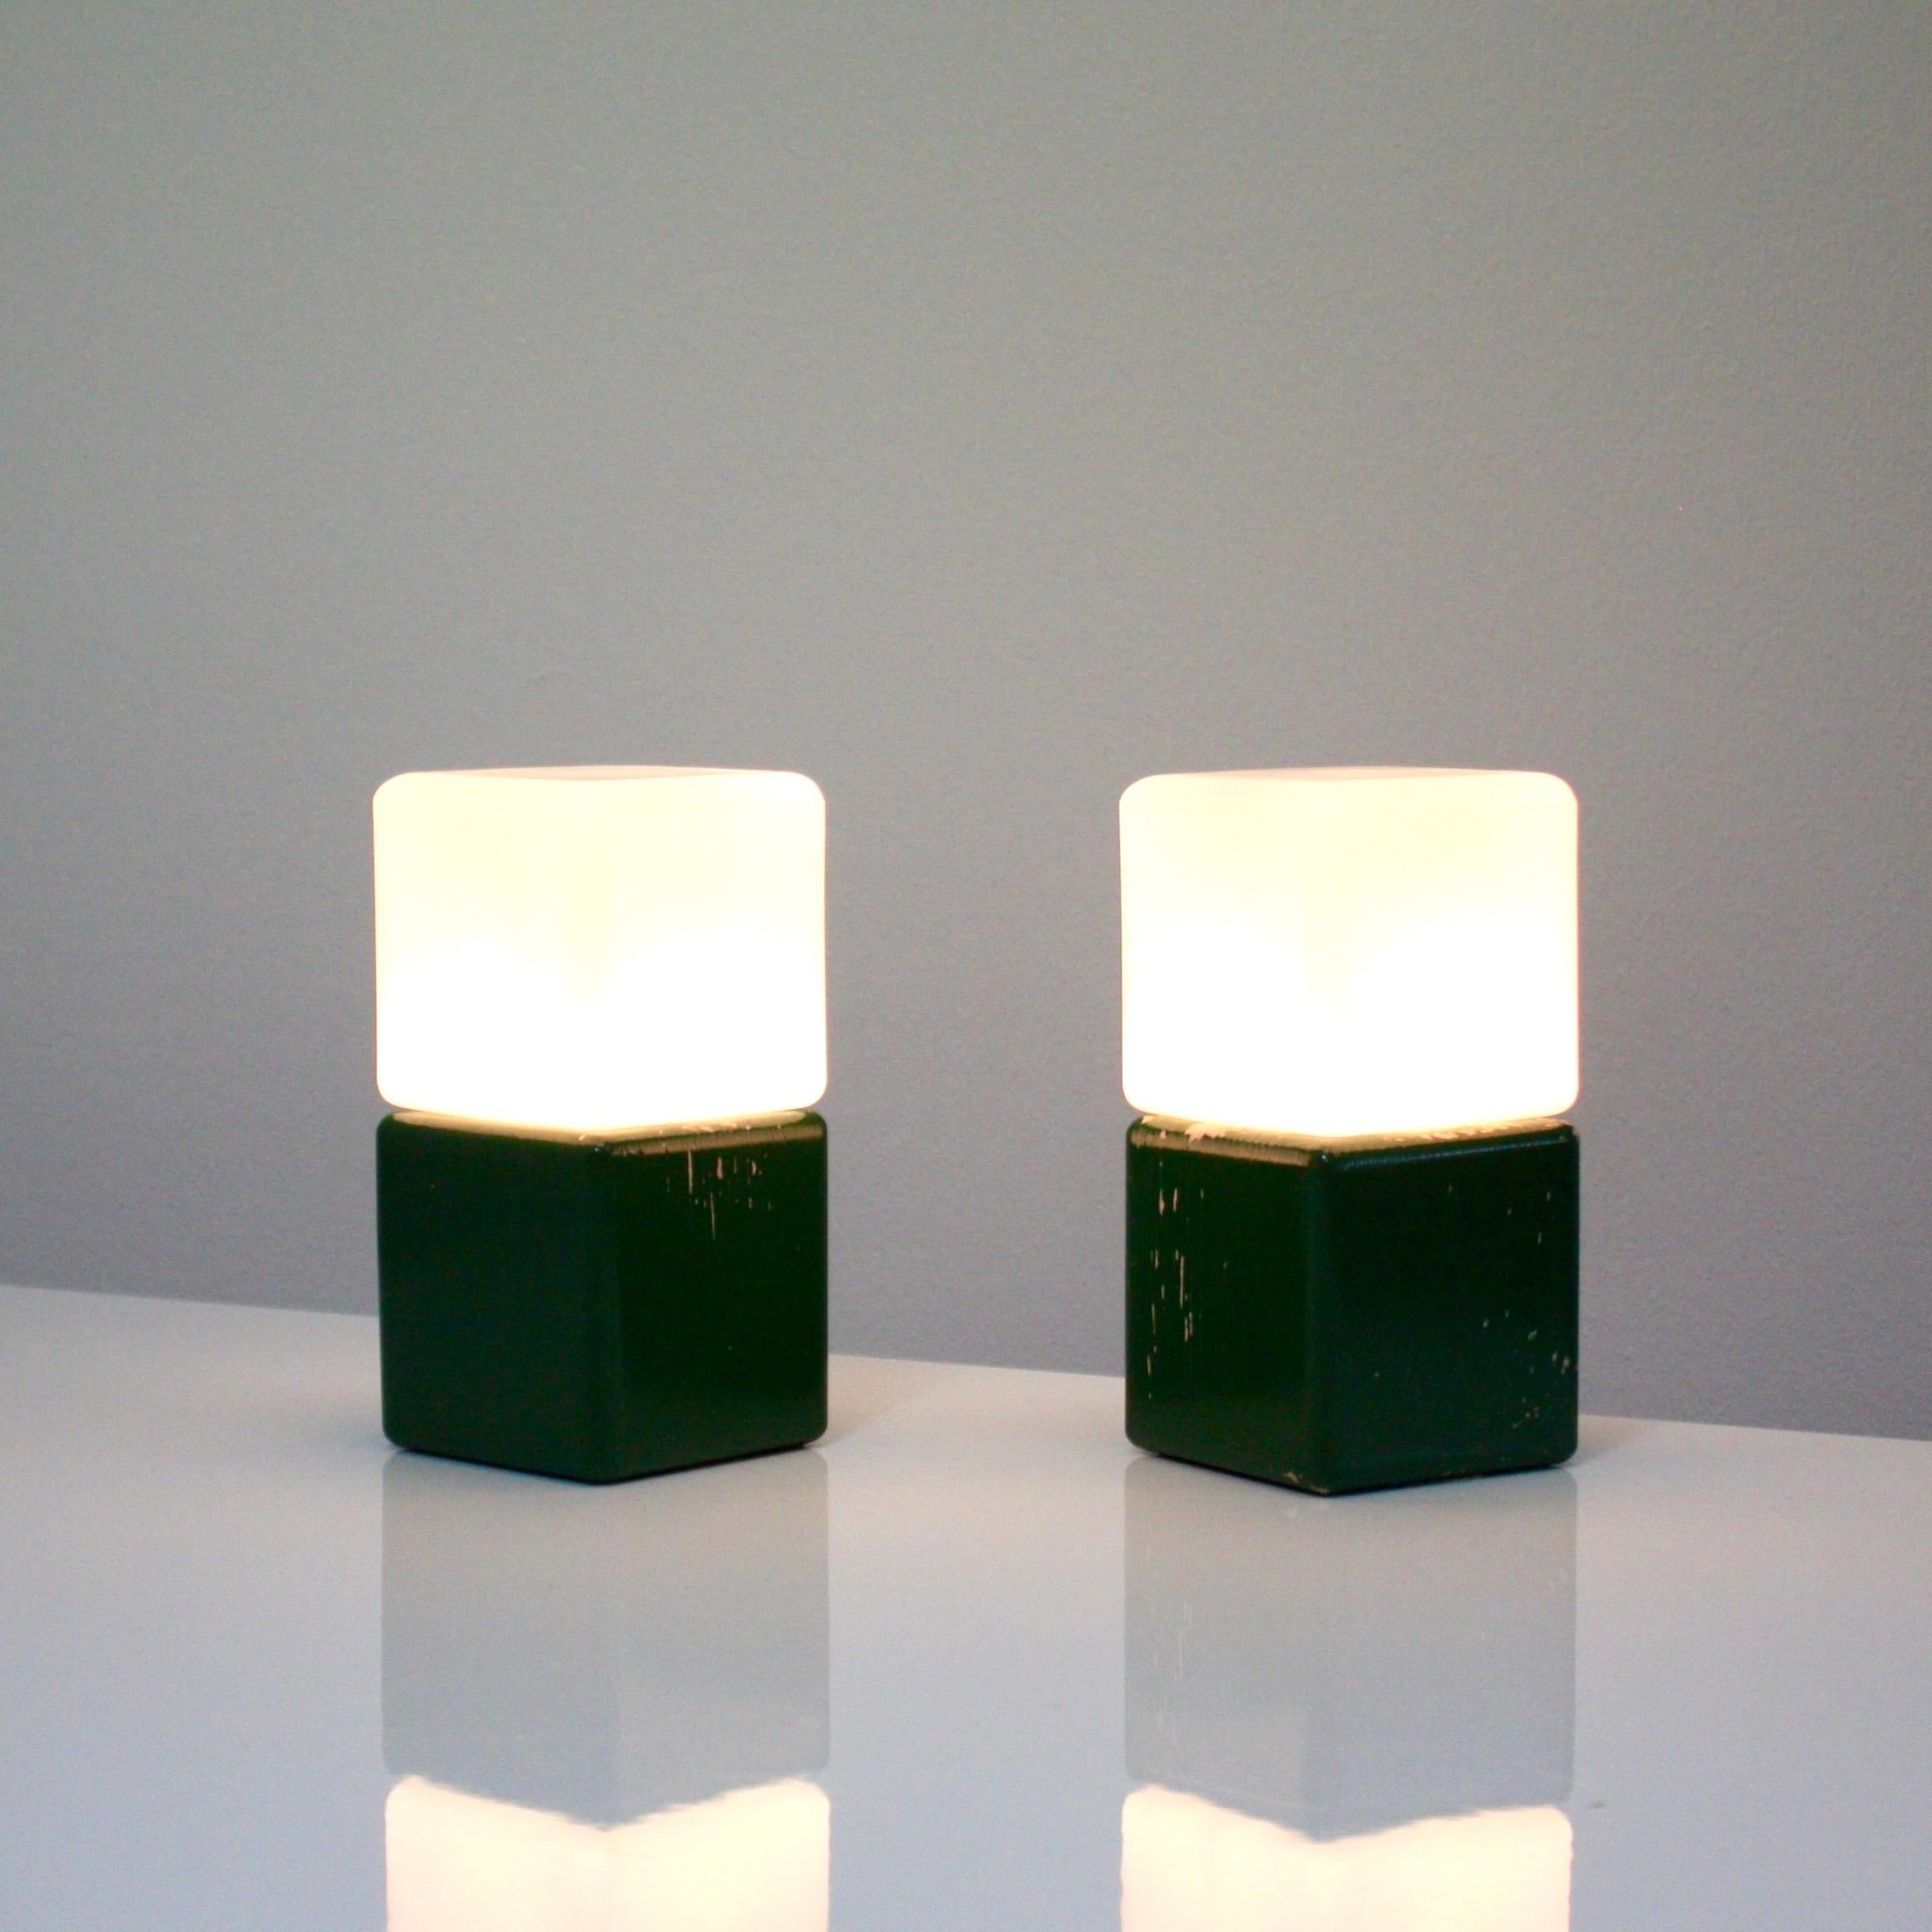 Pair of Green & White Bed Lamps by Holm Sørensen, 1960s, Denmark In Good Condition For Sale In Værløse, DK